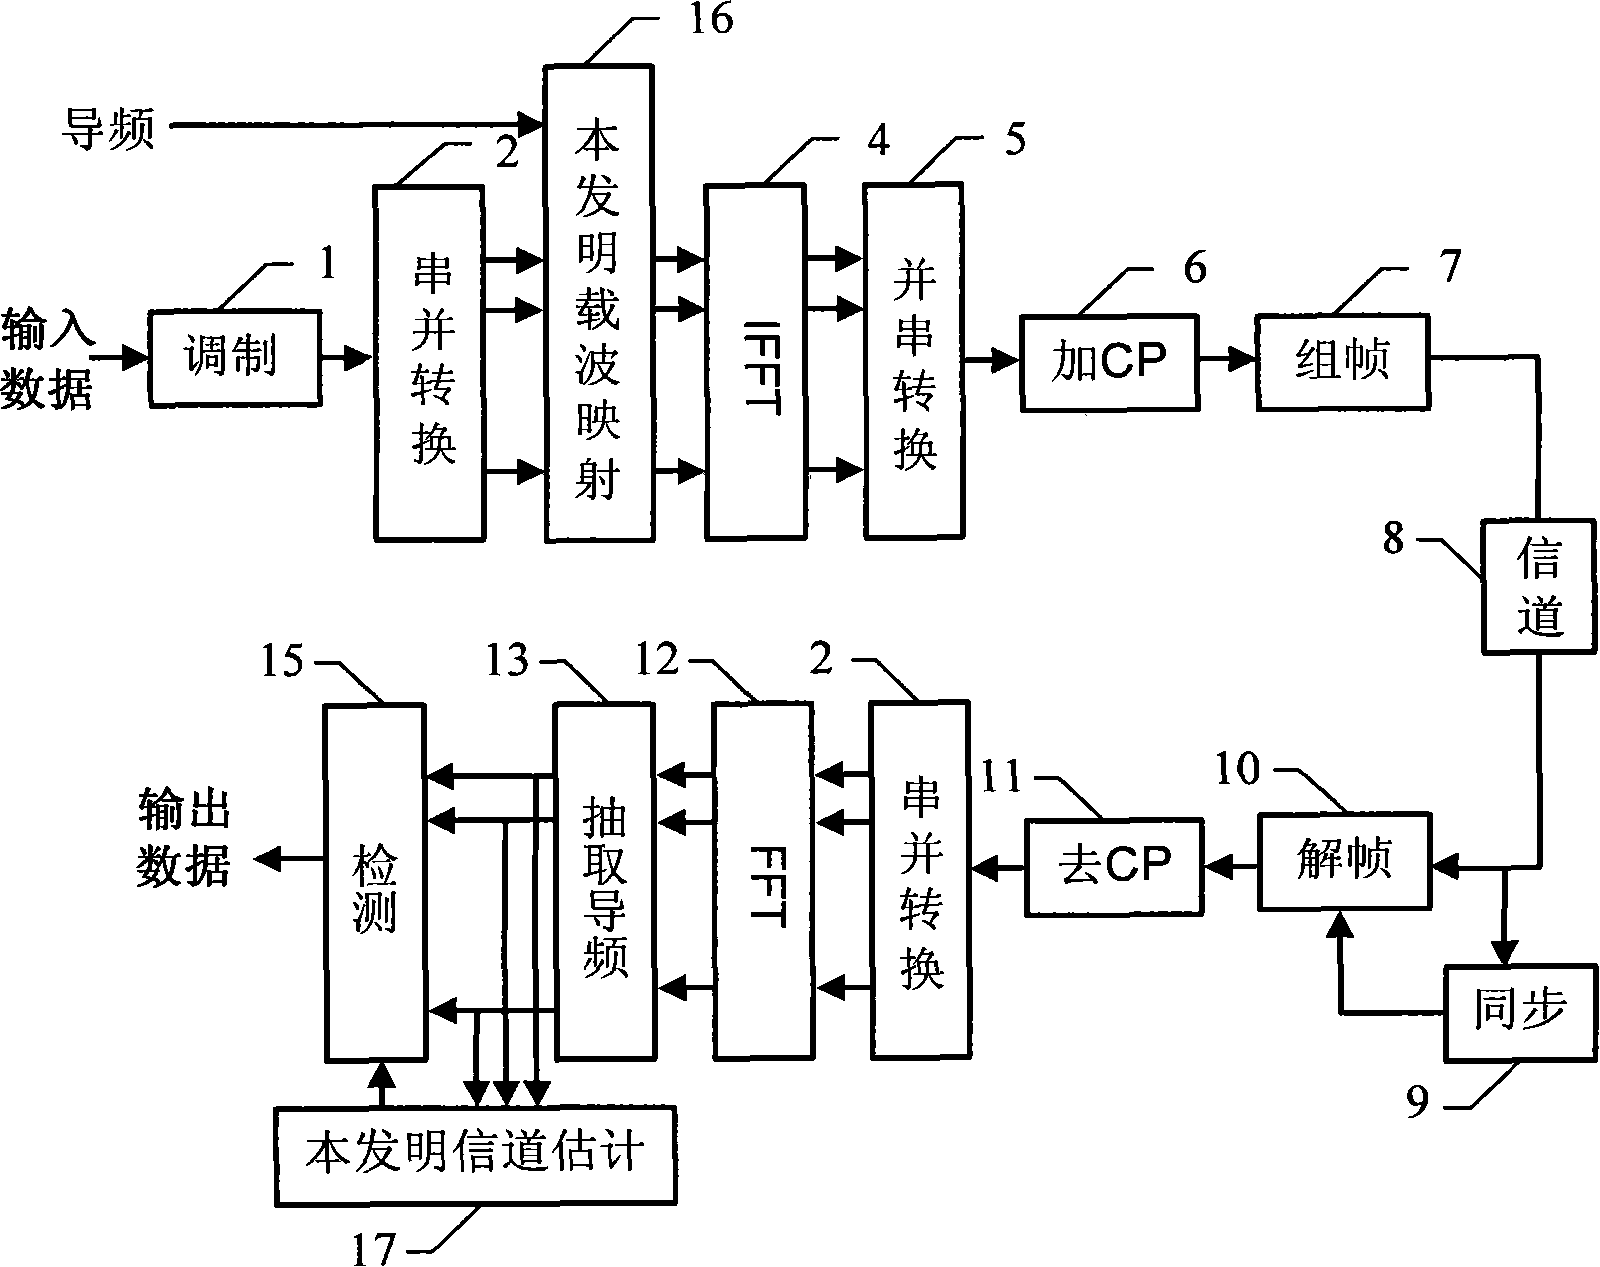 A time change channel estimating method for OFDM system